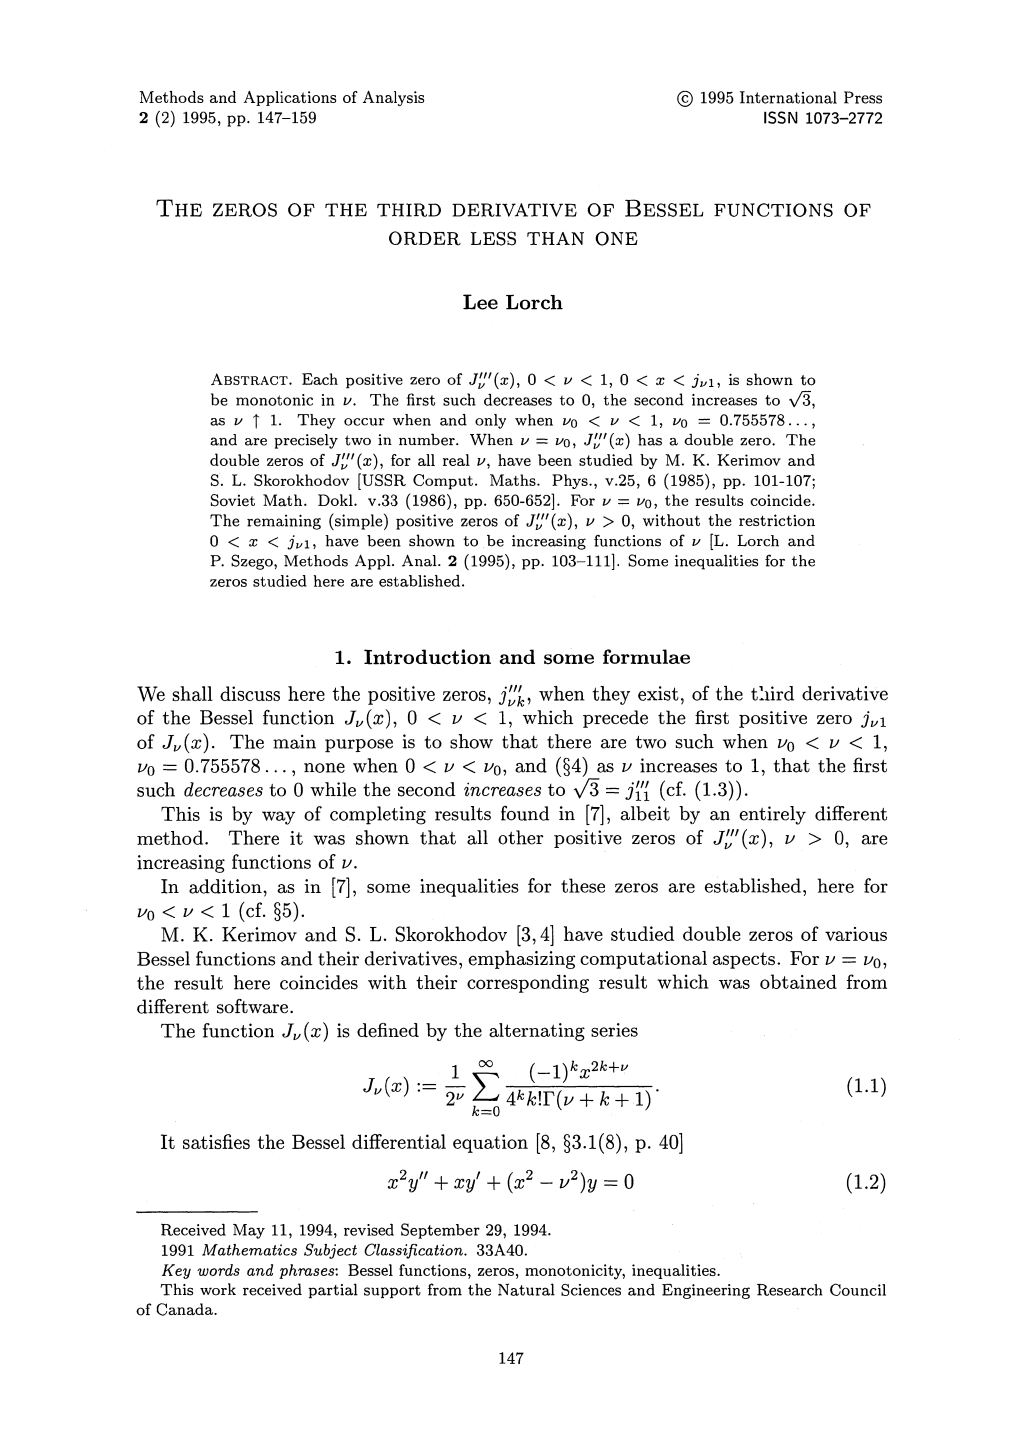 Lee Lorch 1. Introduction and Some Formulae We Shall Discuss Here The